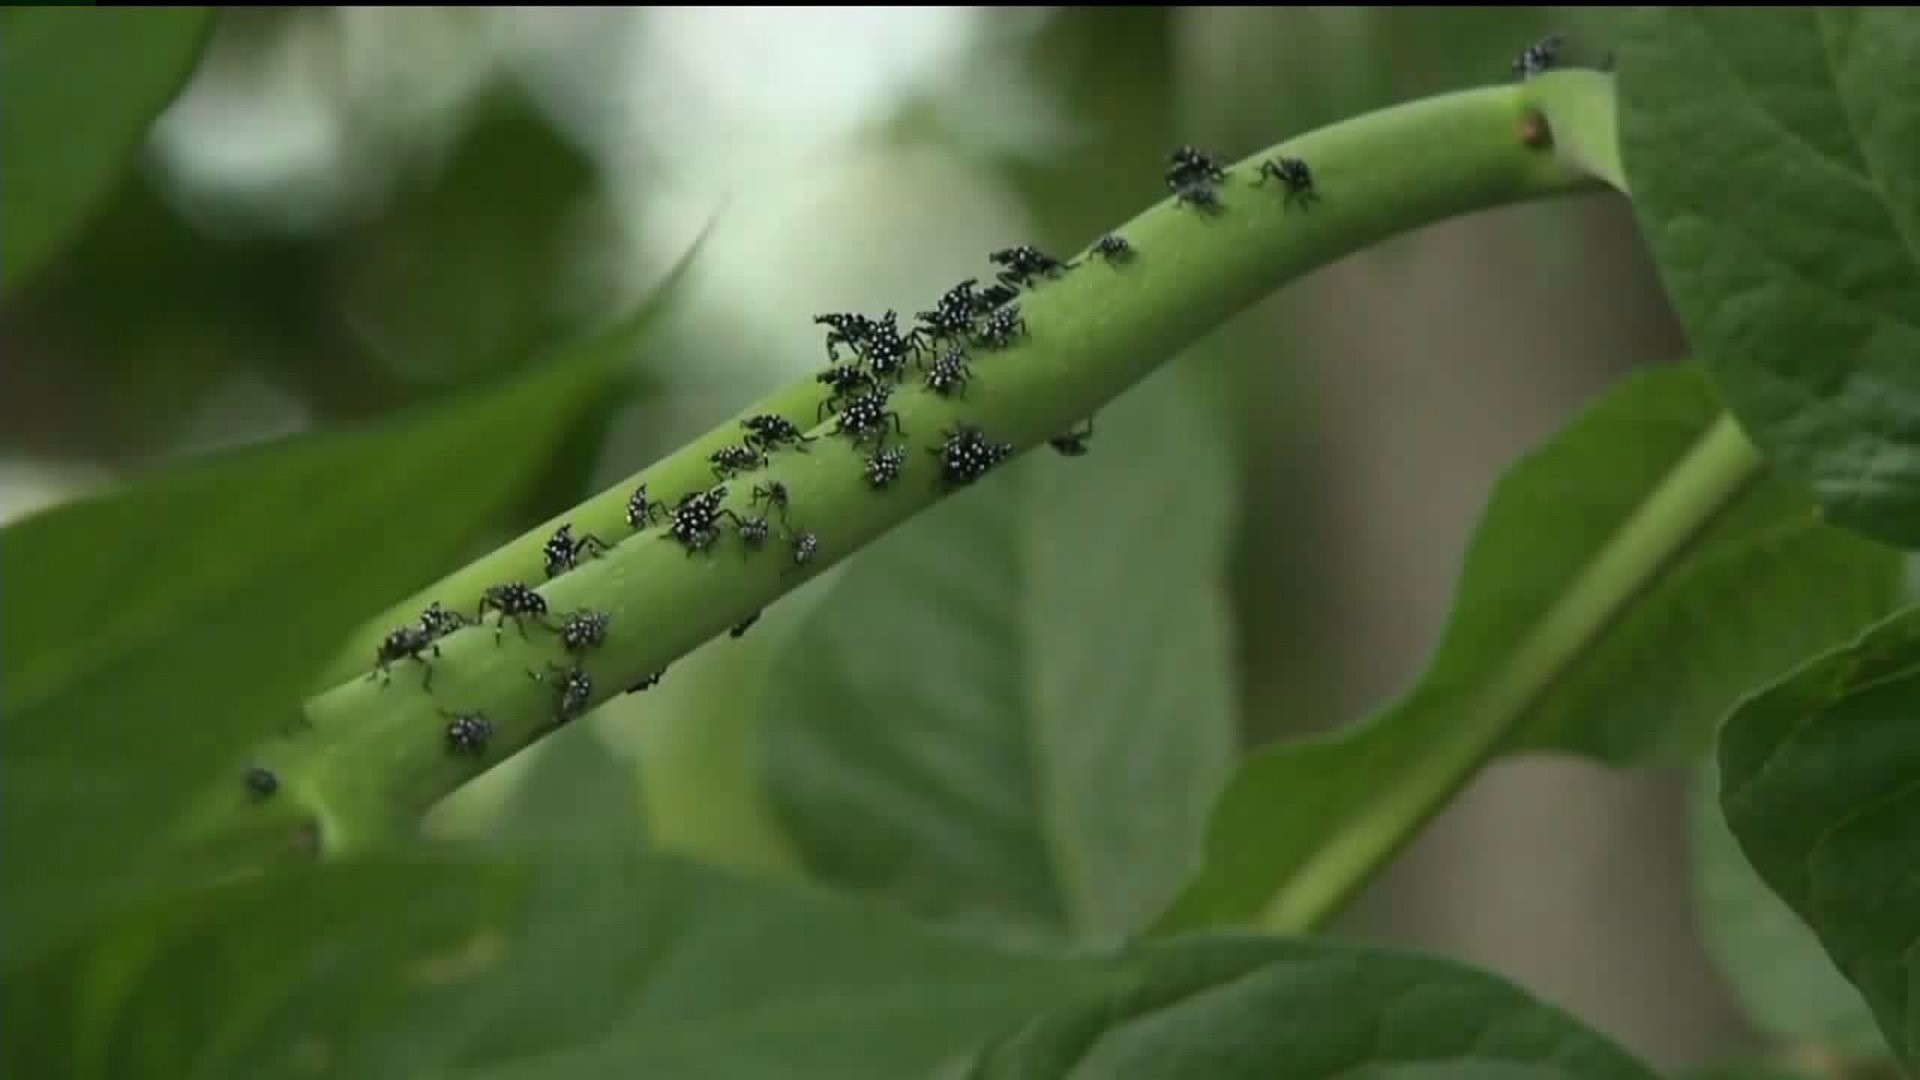 Fungus May Stop Spread of Spotted Lanternflies